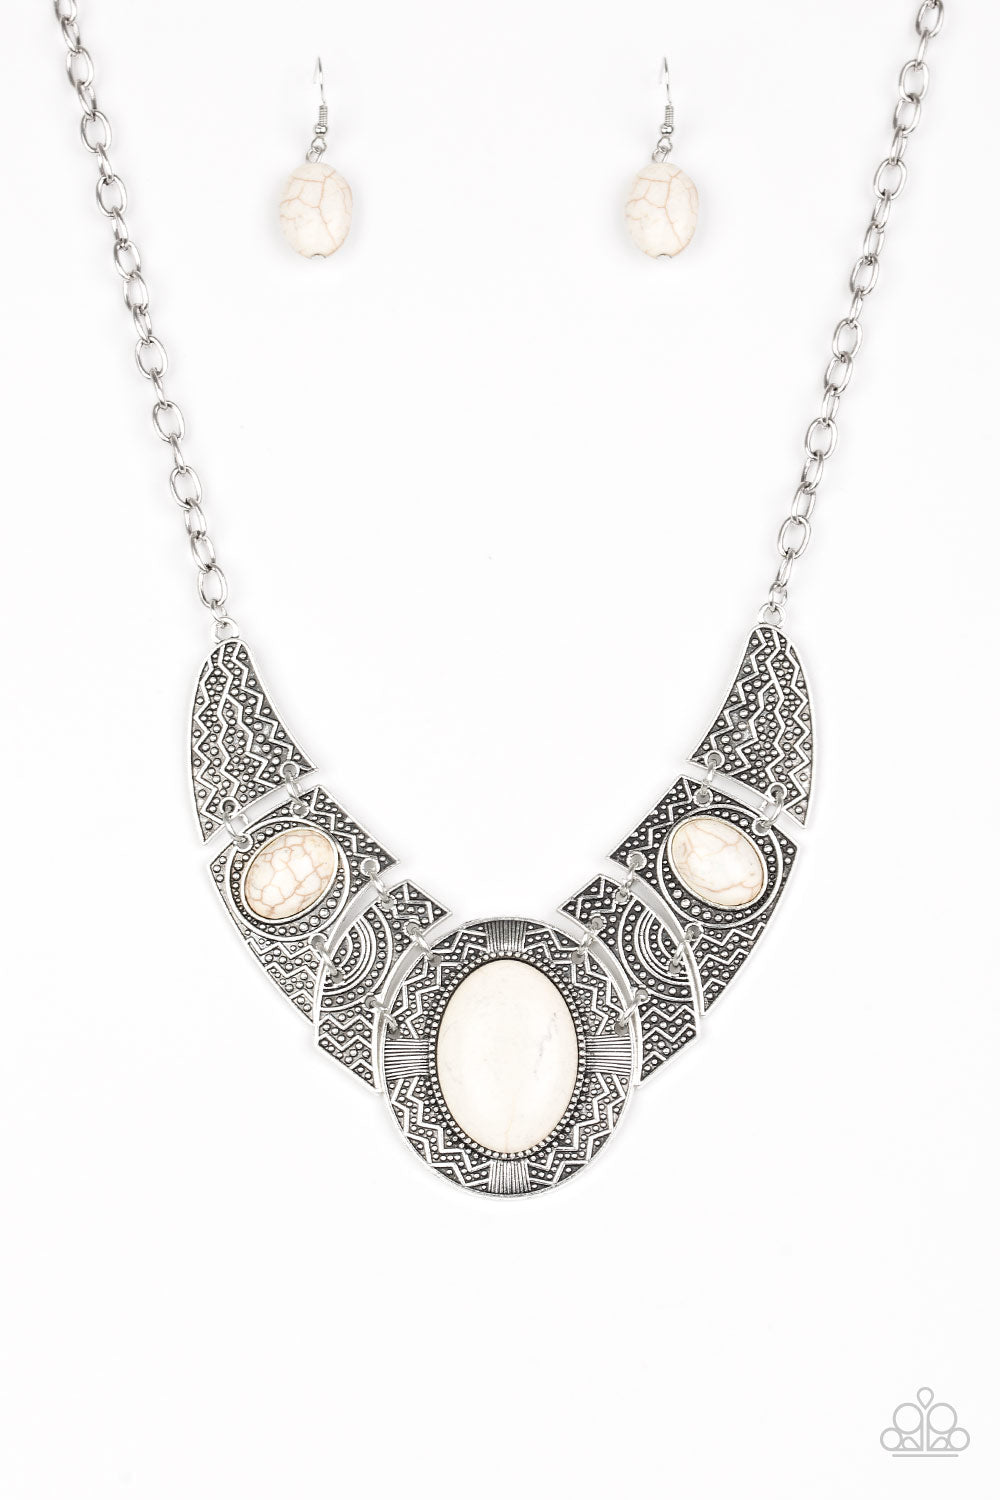 Radiating with studded and tribal inspired patterns, antiqued silver plates connect below the collar for a fierce look. Refreshing white stones are pressed into the plates, adding an artisan flair to the dramatic centerpiece. Features an adjustable clasp closure.